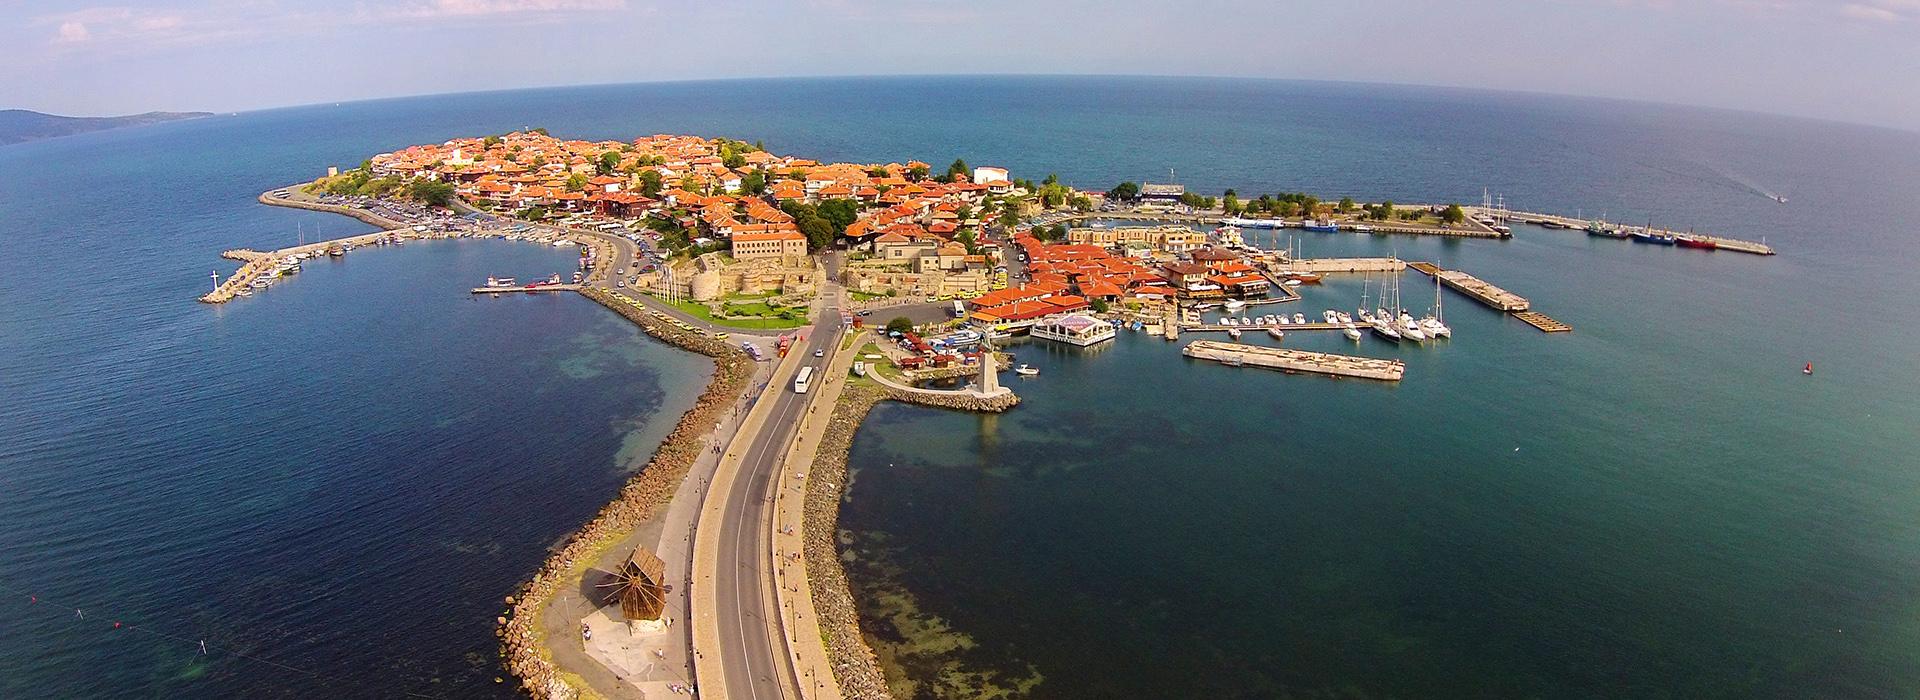 Nessebar was once an important trading city and part of the Delian League - an alliance of ancient Greek states. - © Nessebar Municipality